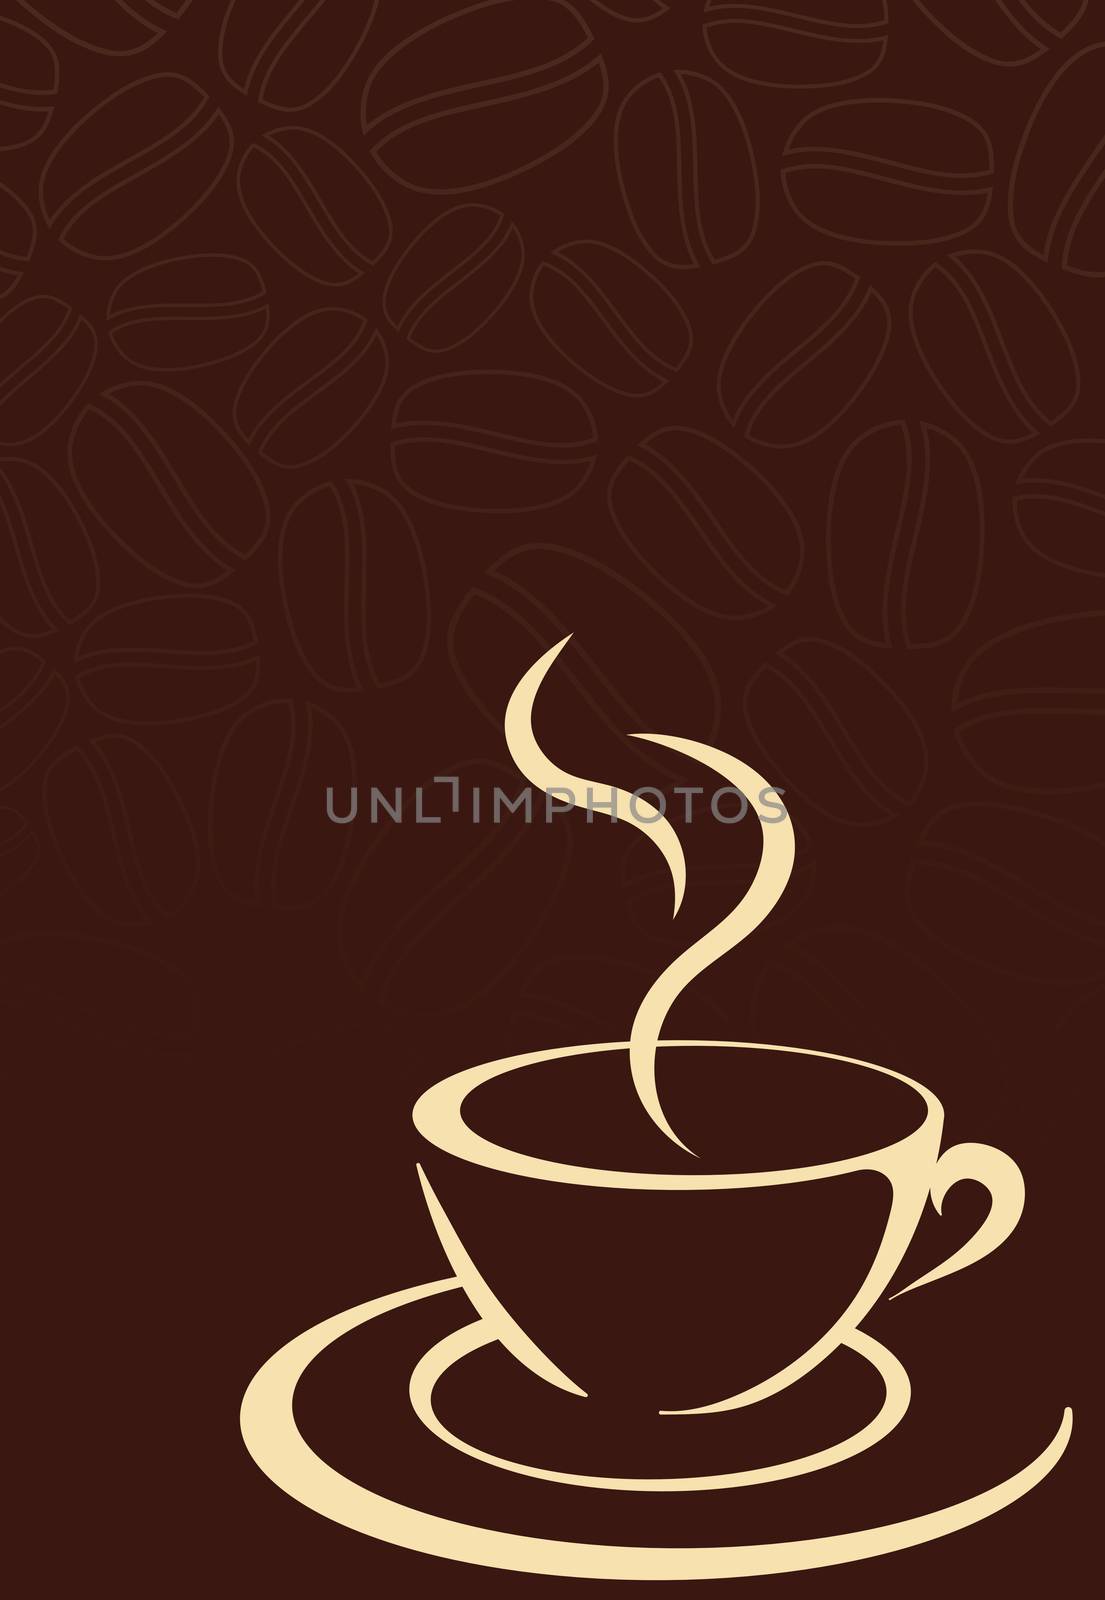 Illustration of a coffee cup and some coffee beans